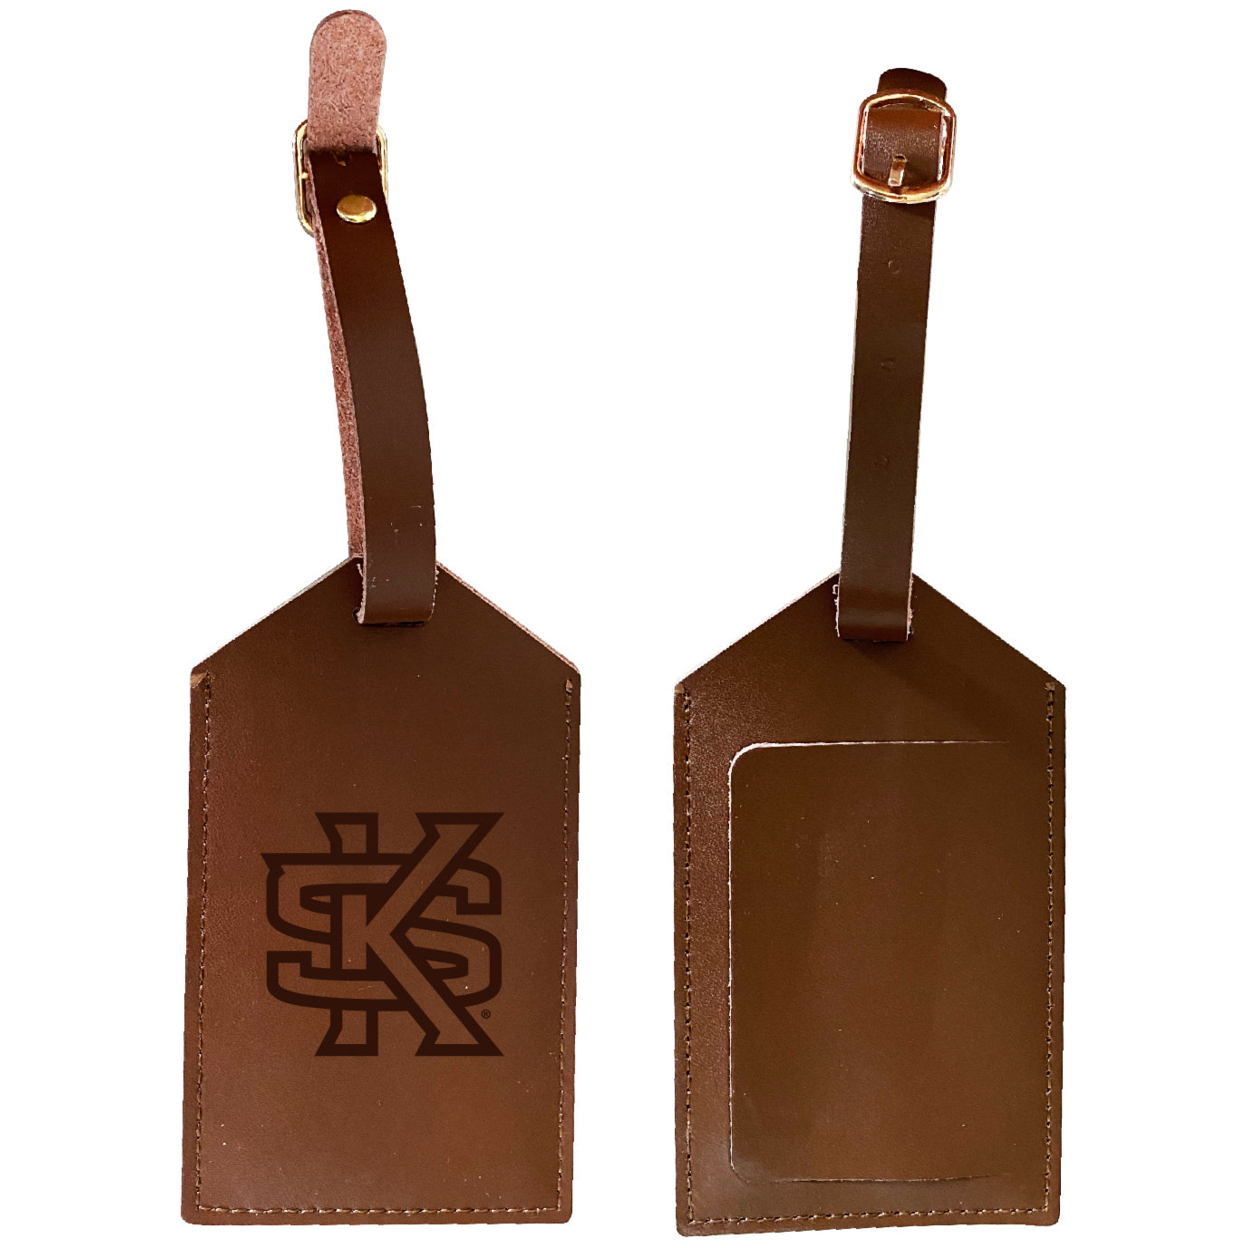 Kennesaw State University Leather Luggage Tag Engraved